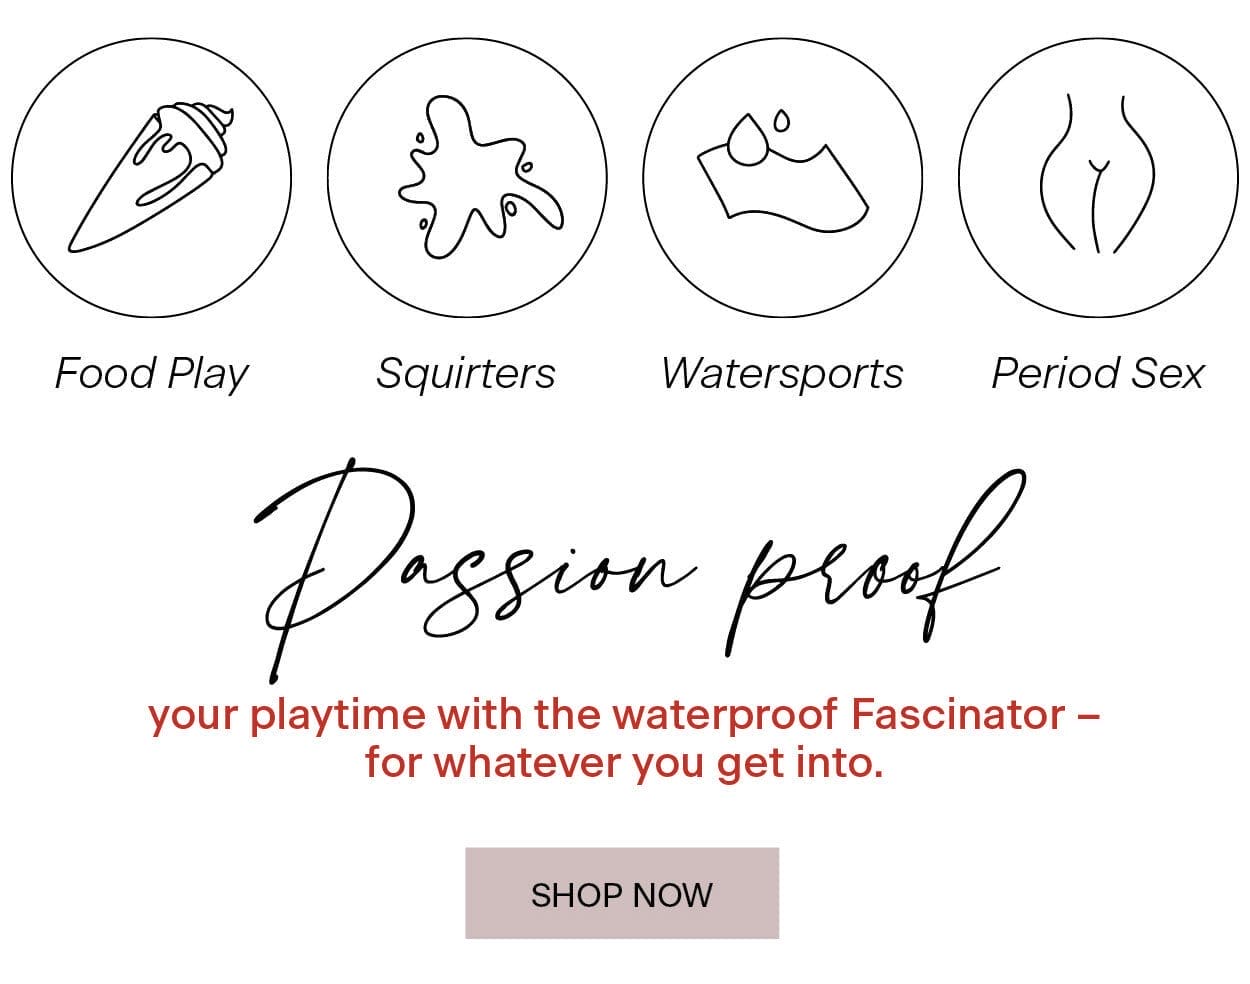 Passion proof your playtime with the waterproof Fascinator – for whatever you get into.\xa0 Food Play Squirters Watersports Period Sex